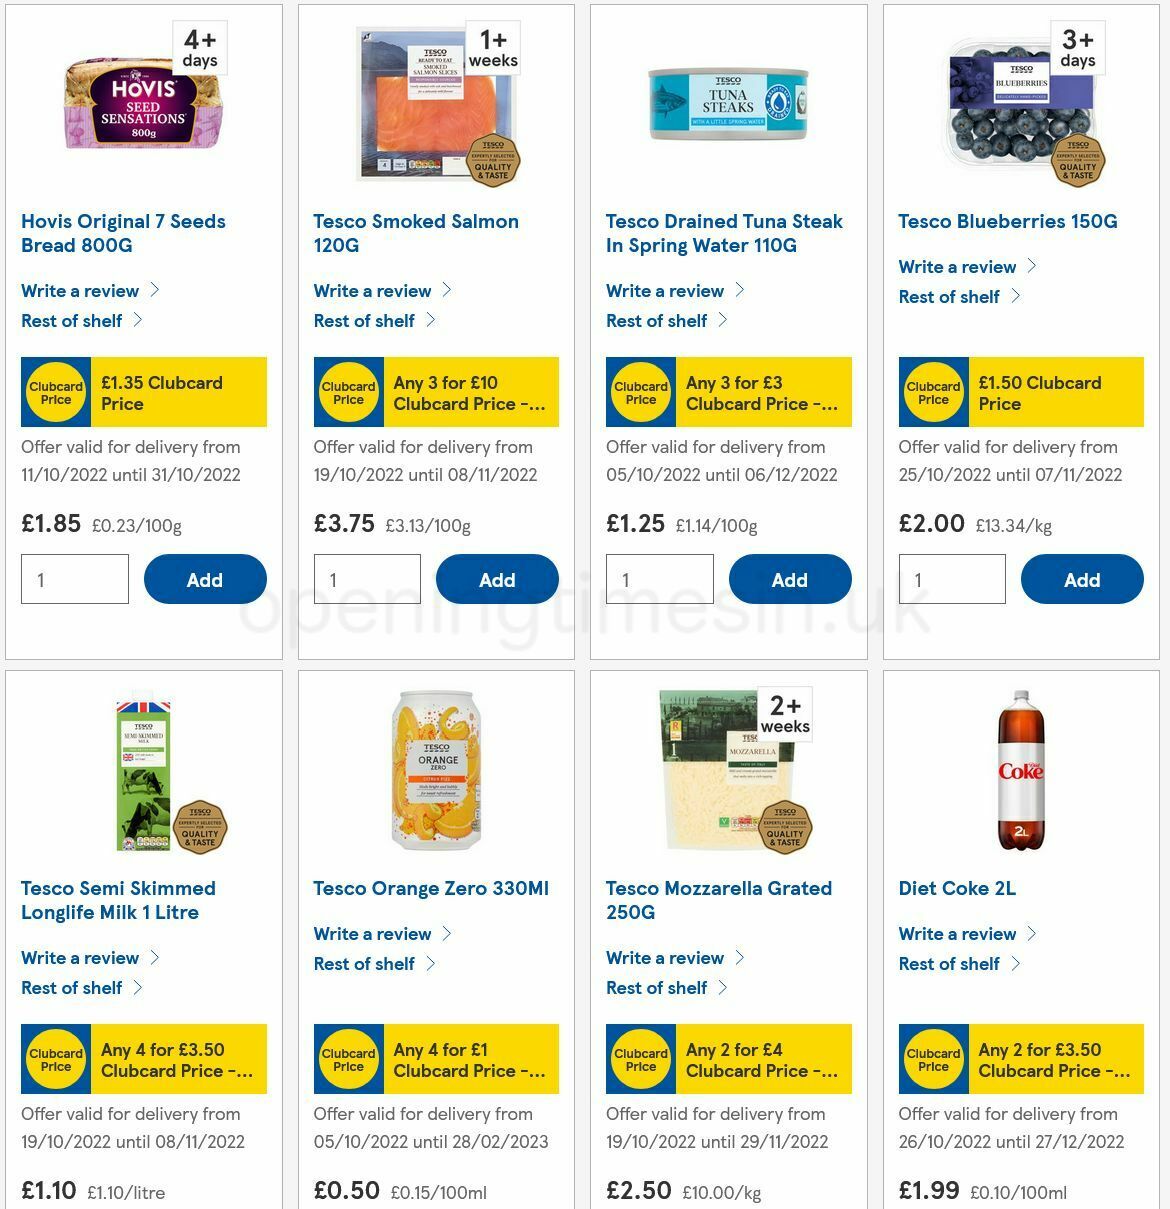 TESCO Offers from 27 October